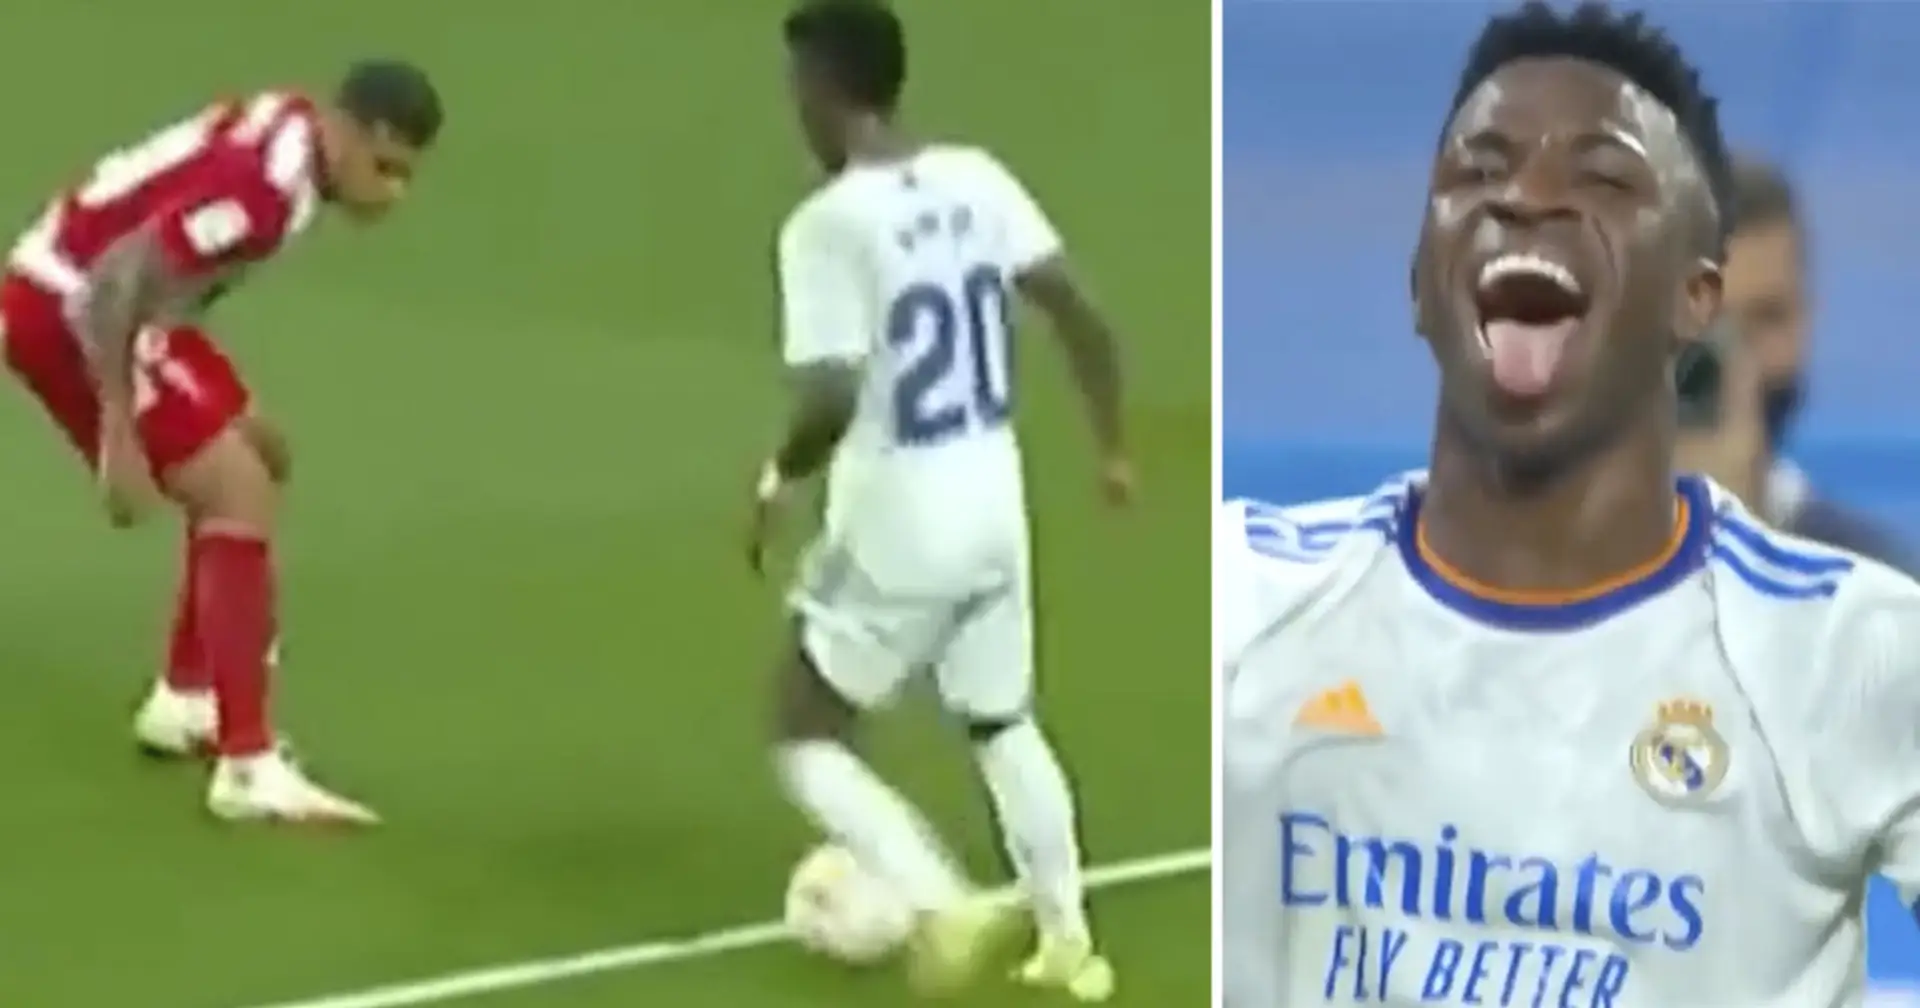 Just 2 touches, epic run: anatomy of Vinicius' penalty-leading move vs Celta